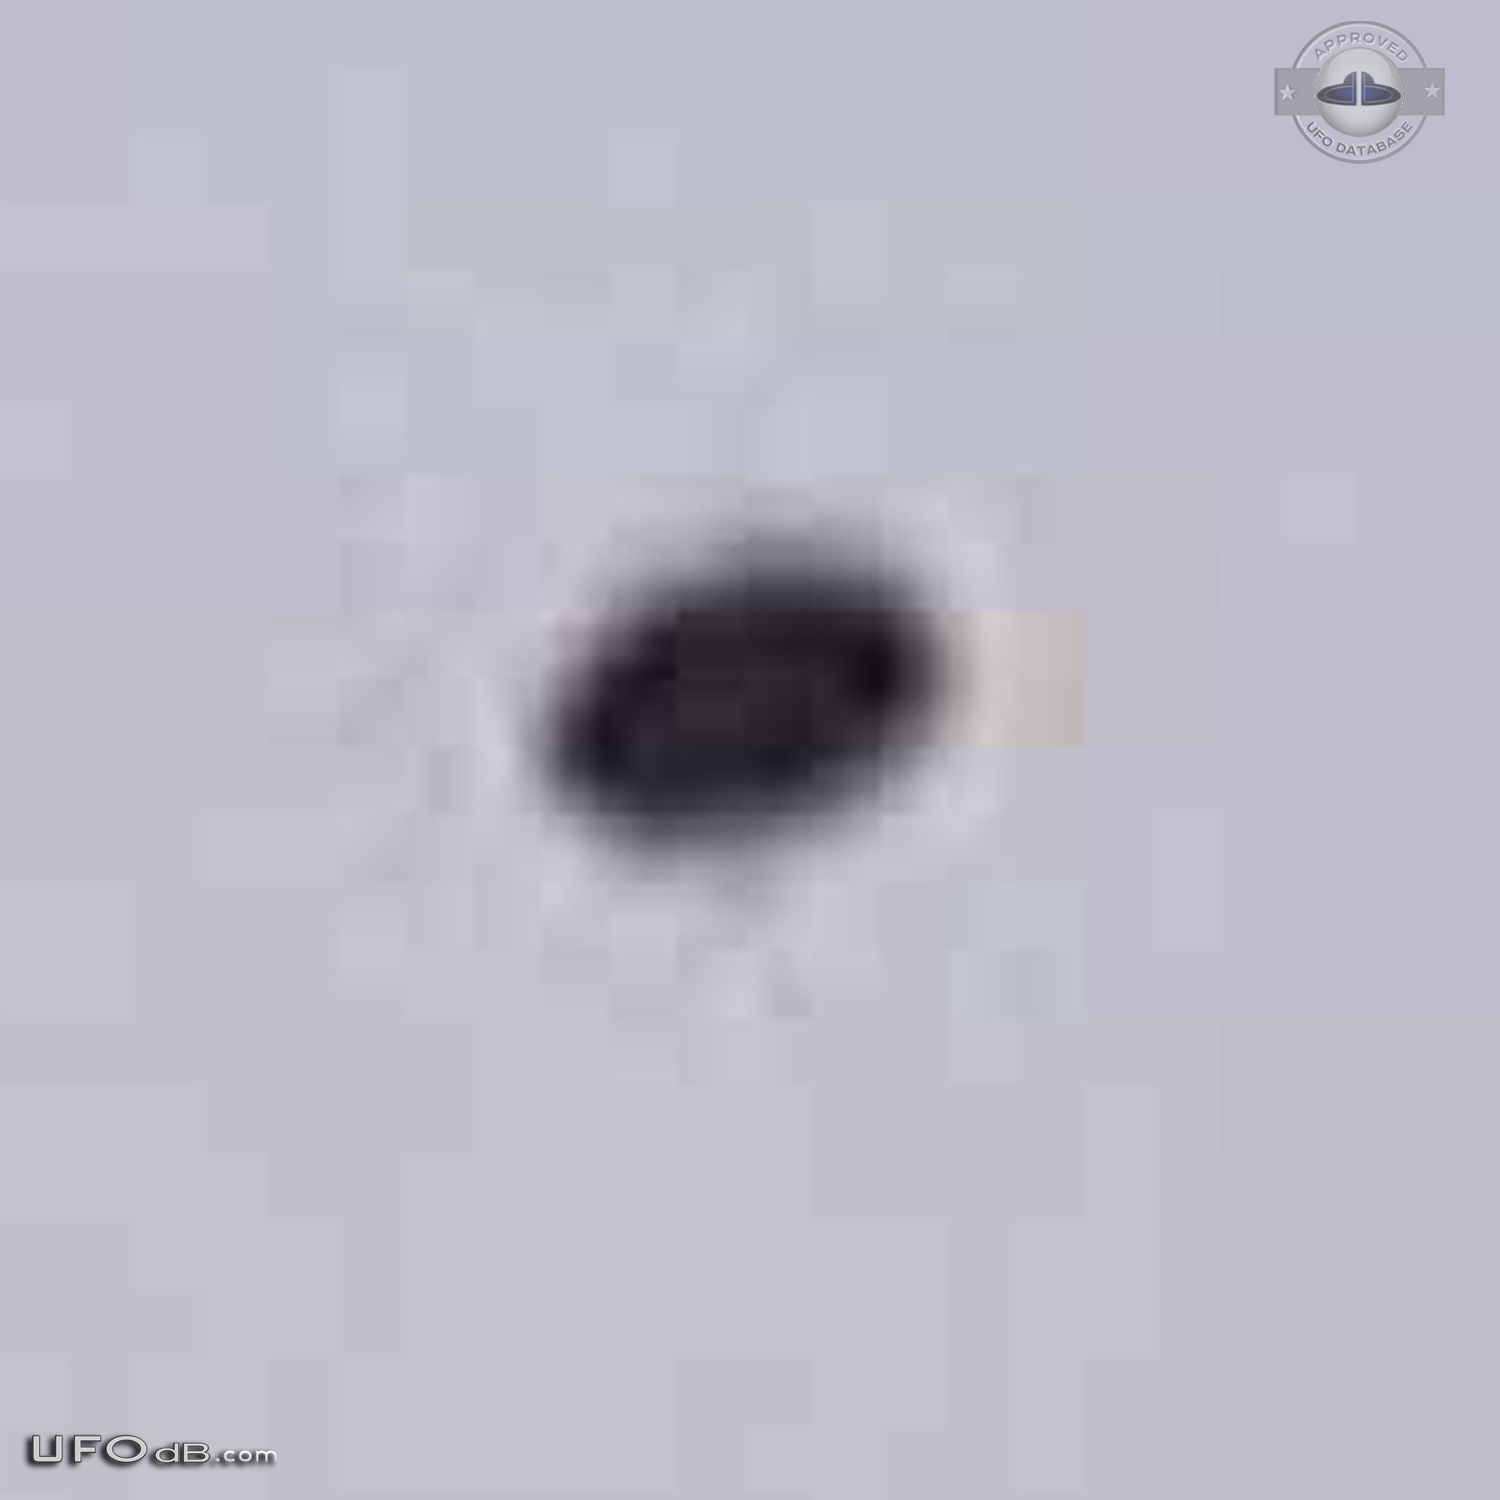 Poland 2003 Ufo sighting get aircrafts dispatched to check out the ufo UFO Picture #379-8